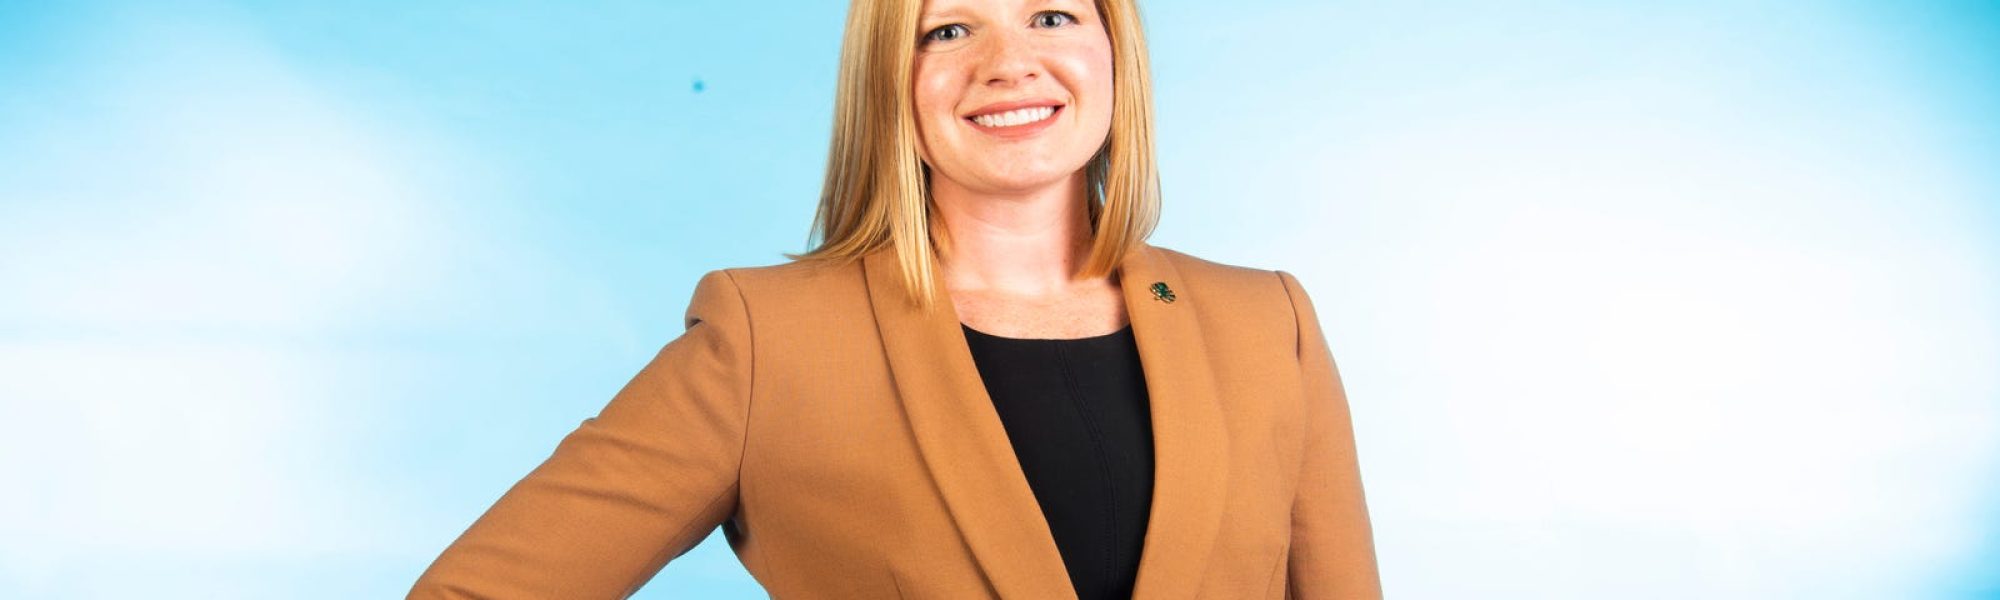 40 Under 40: N. Dianne Bull Ezell advances ORNL's nuclear research while mentoring next generation